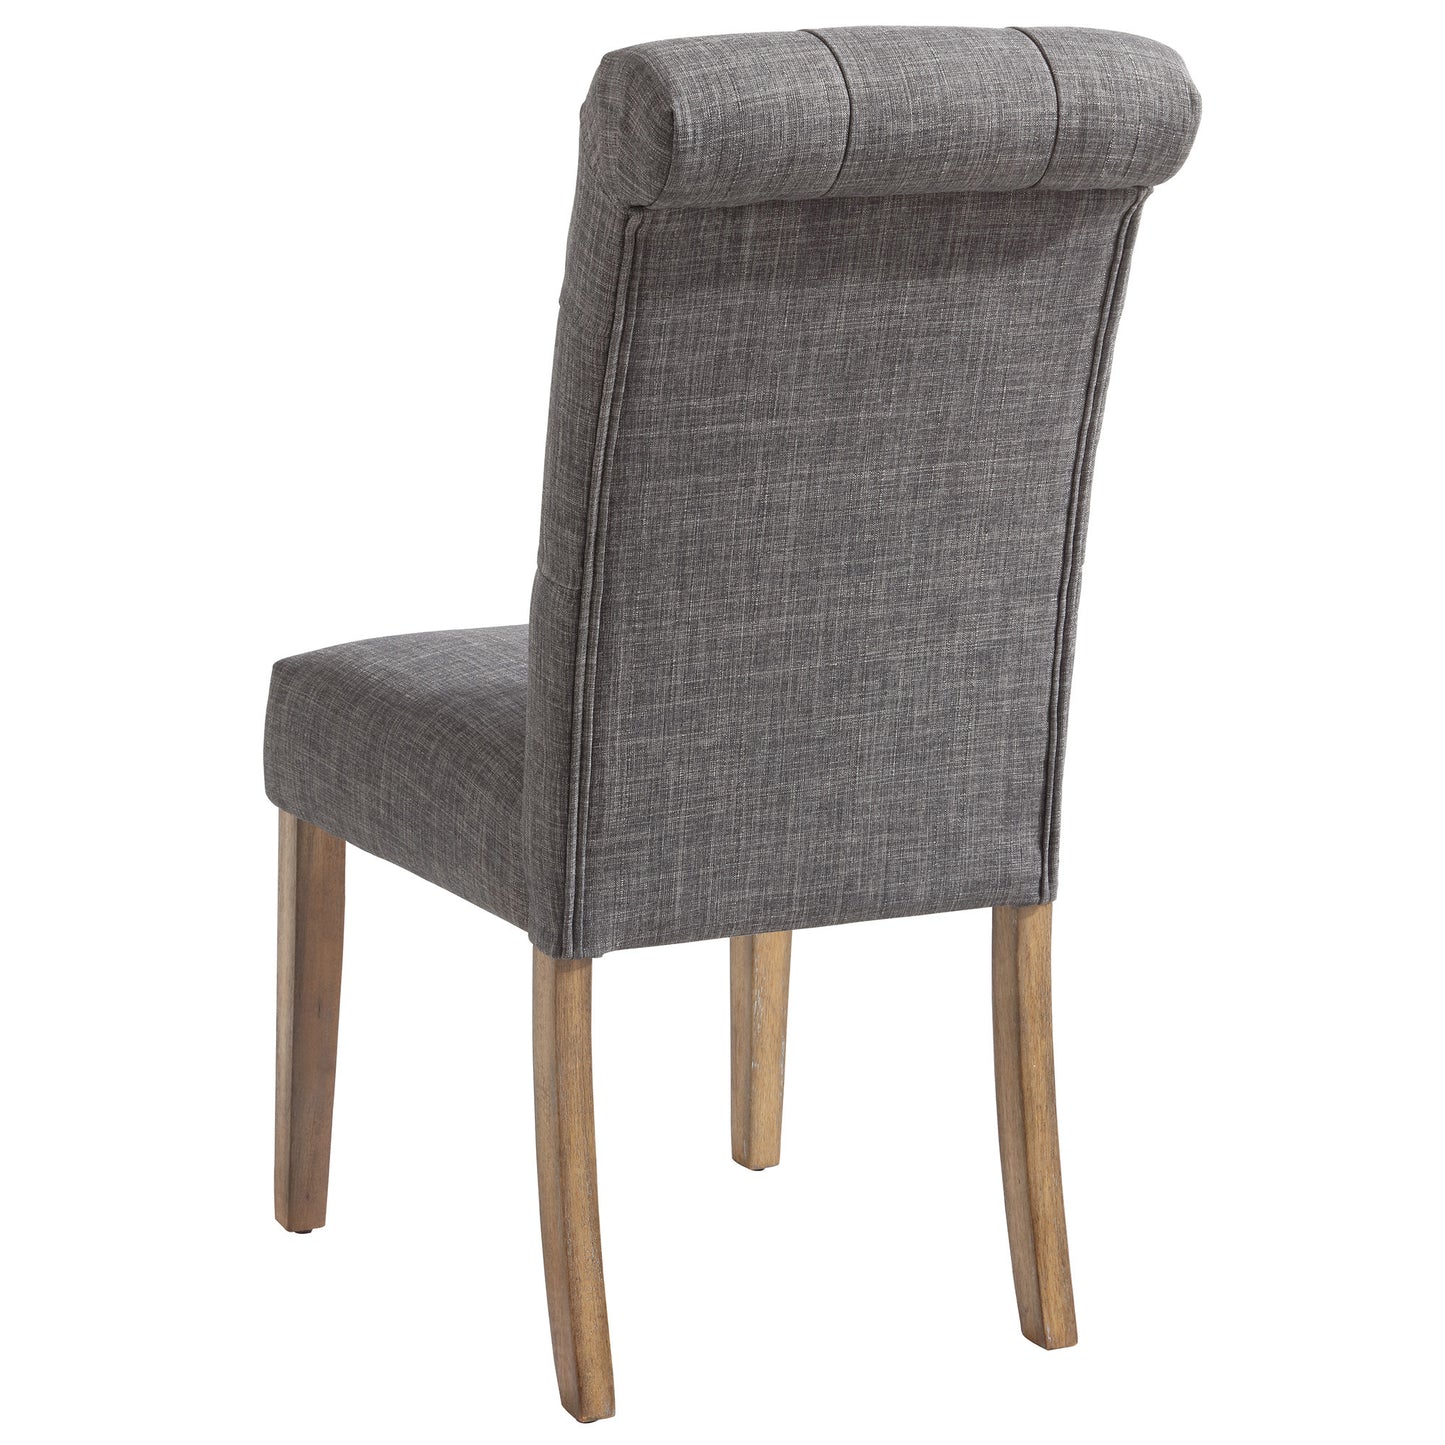 (MELIA GREY- 2 PACK)- FABRIC- DINING CHAIR